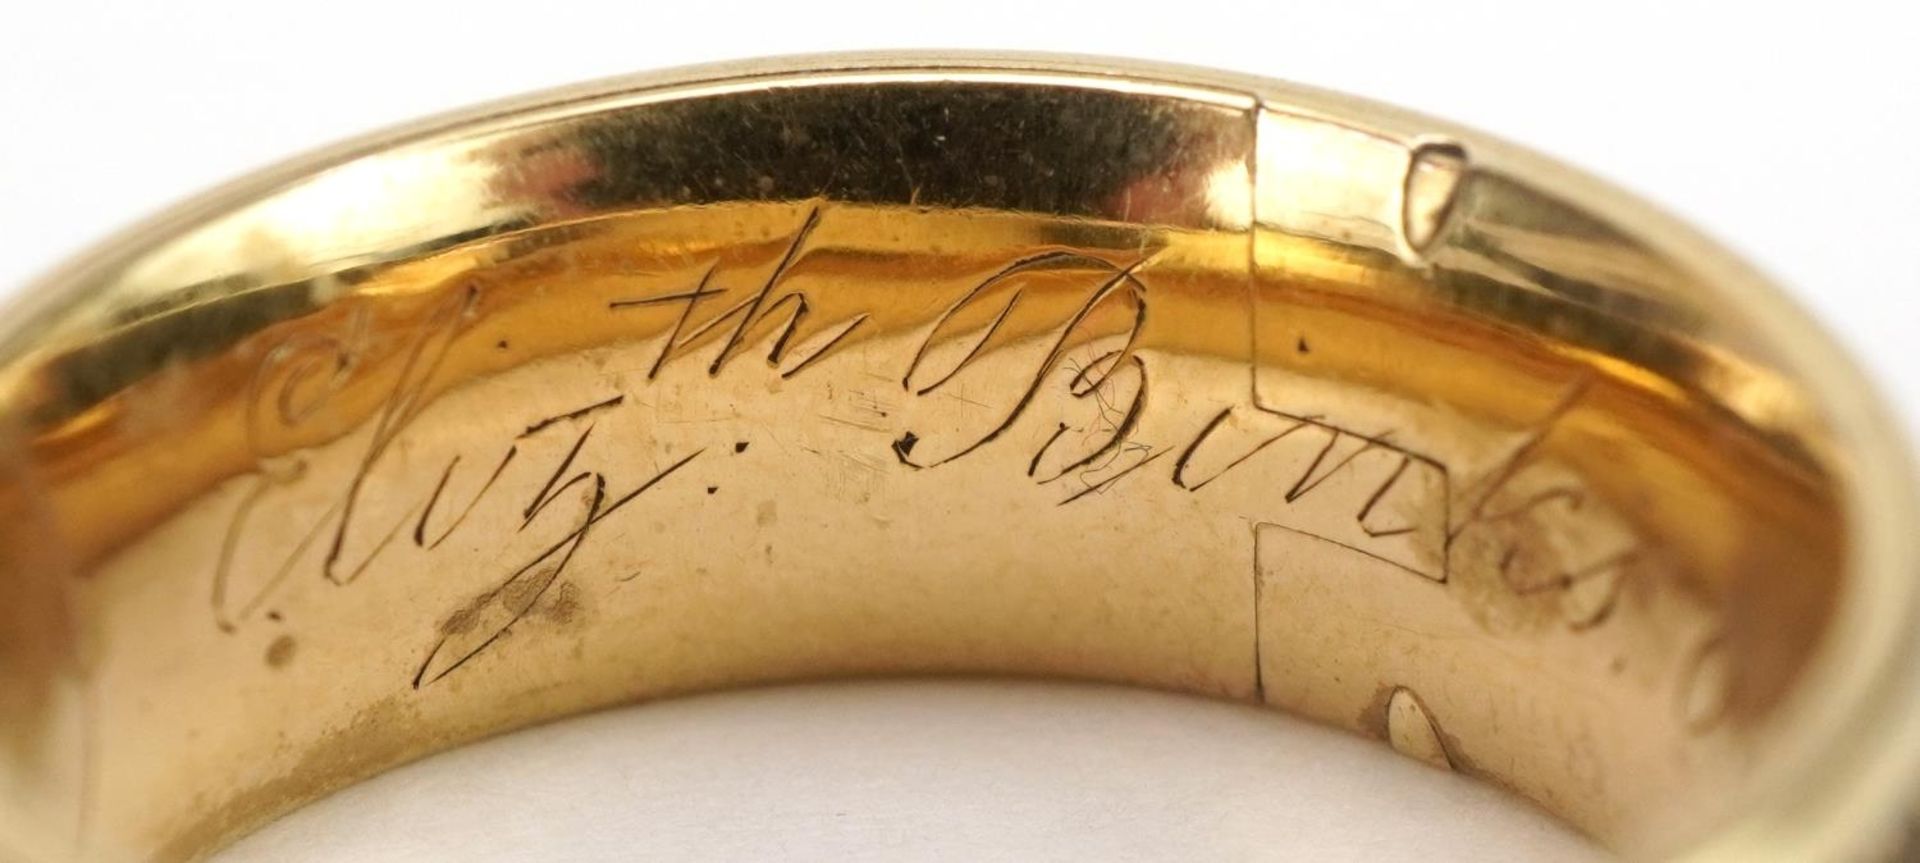 Georgian unmarked gold repousse band mourning ring with hidden locket compartment, tests as 22ct - Image 8 of 8